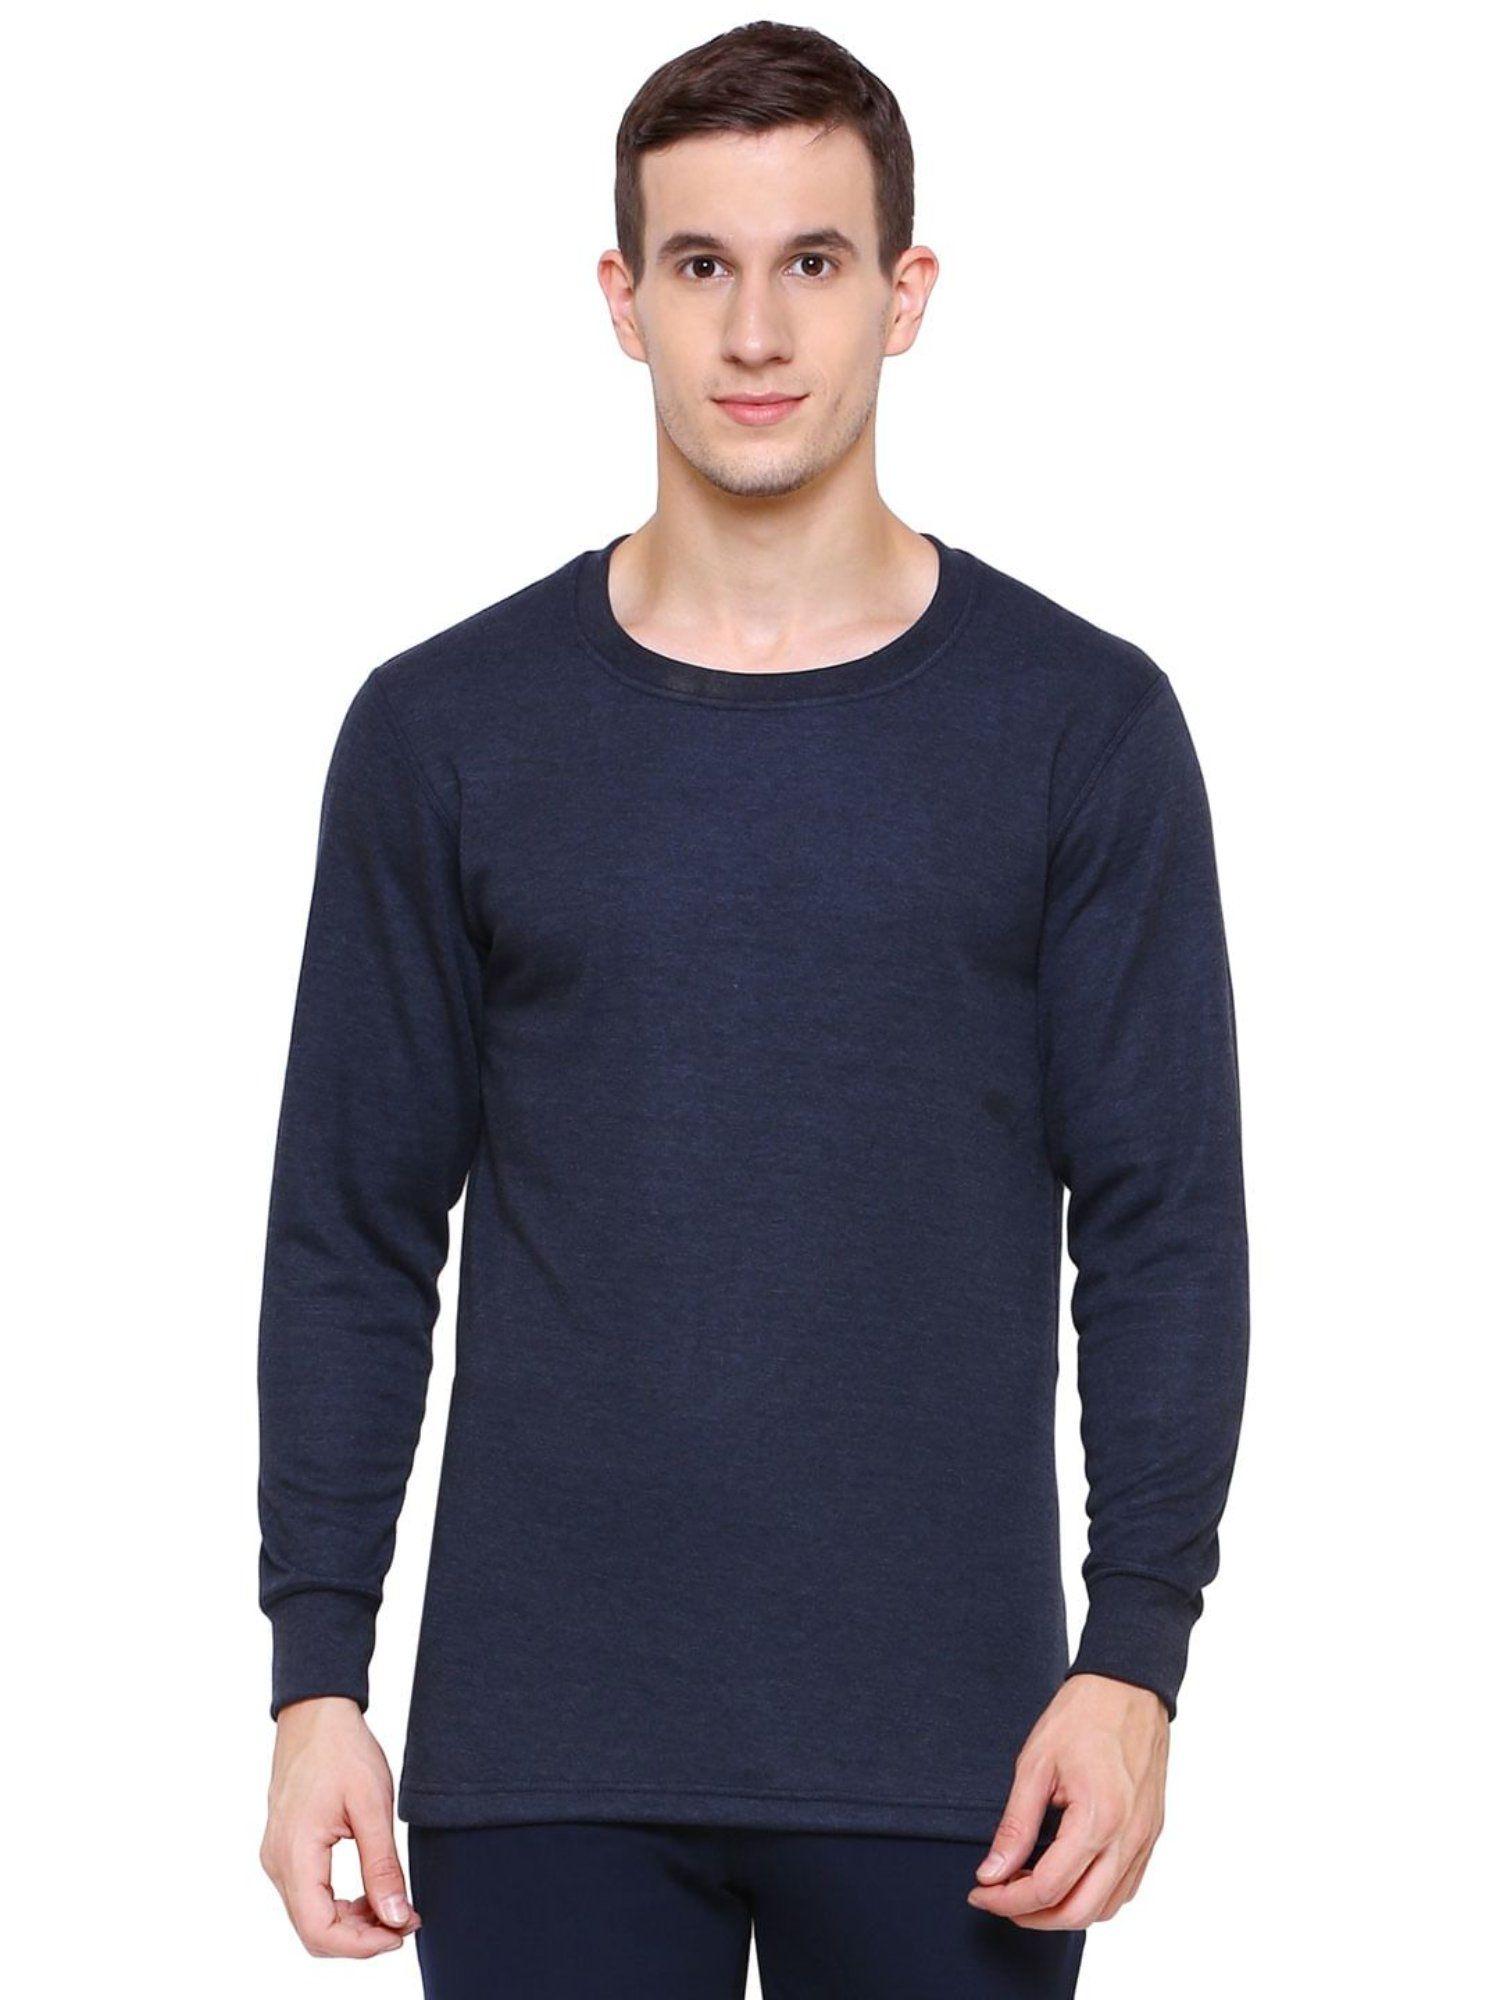 men thermal top round neck full sleeves navy blue